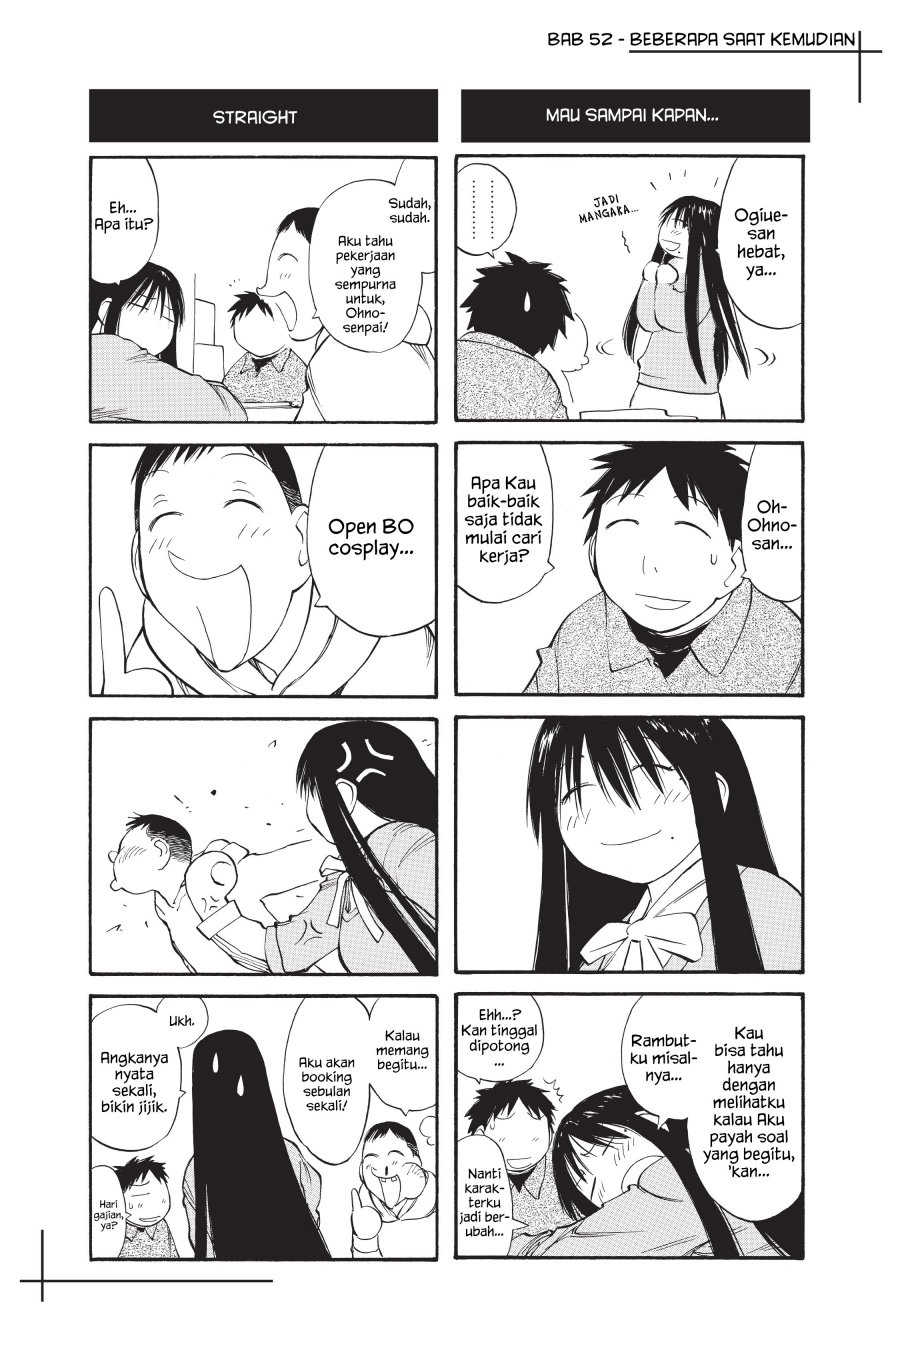 Genshiken – The Society for the Study of Modern Visual Culture Chapter 52 Image 26